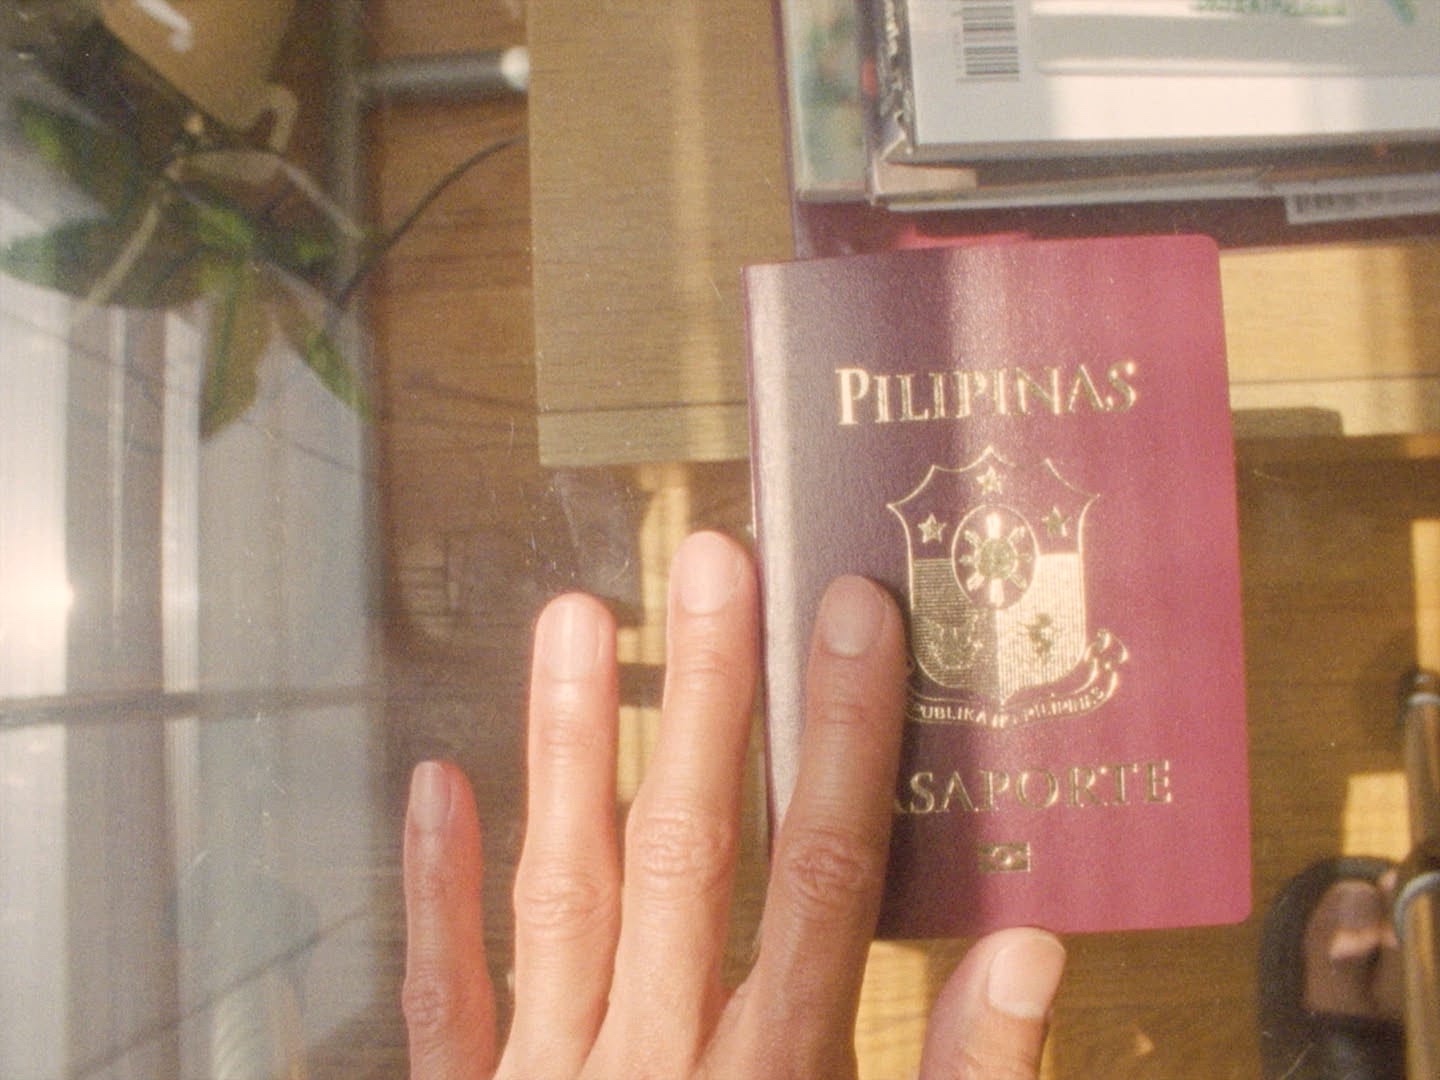 Image of a brown hand touching a burgundy passport with gold font that reads “Pilipinas Pasaporte” and features the Filipino crest in the center. The passport is sitting on a glass table- beneath it there are a stack of books sitting on wood floor.|